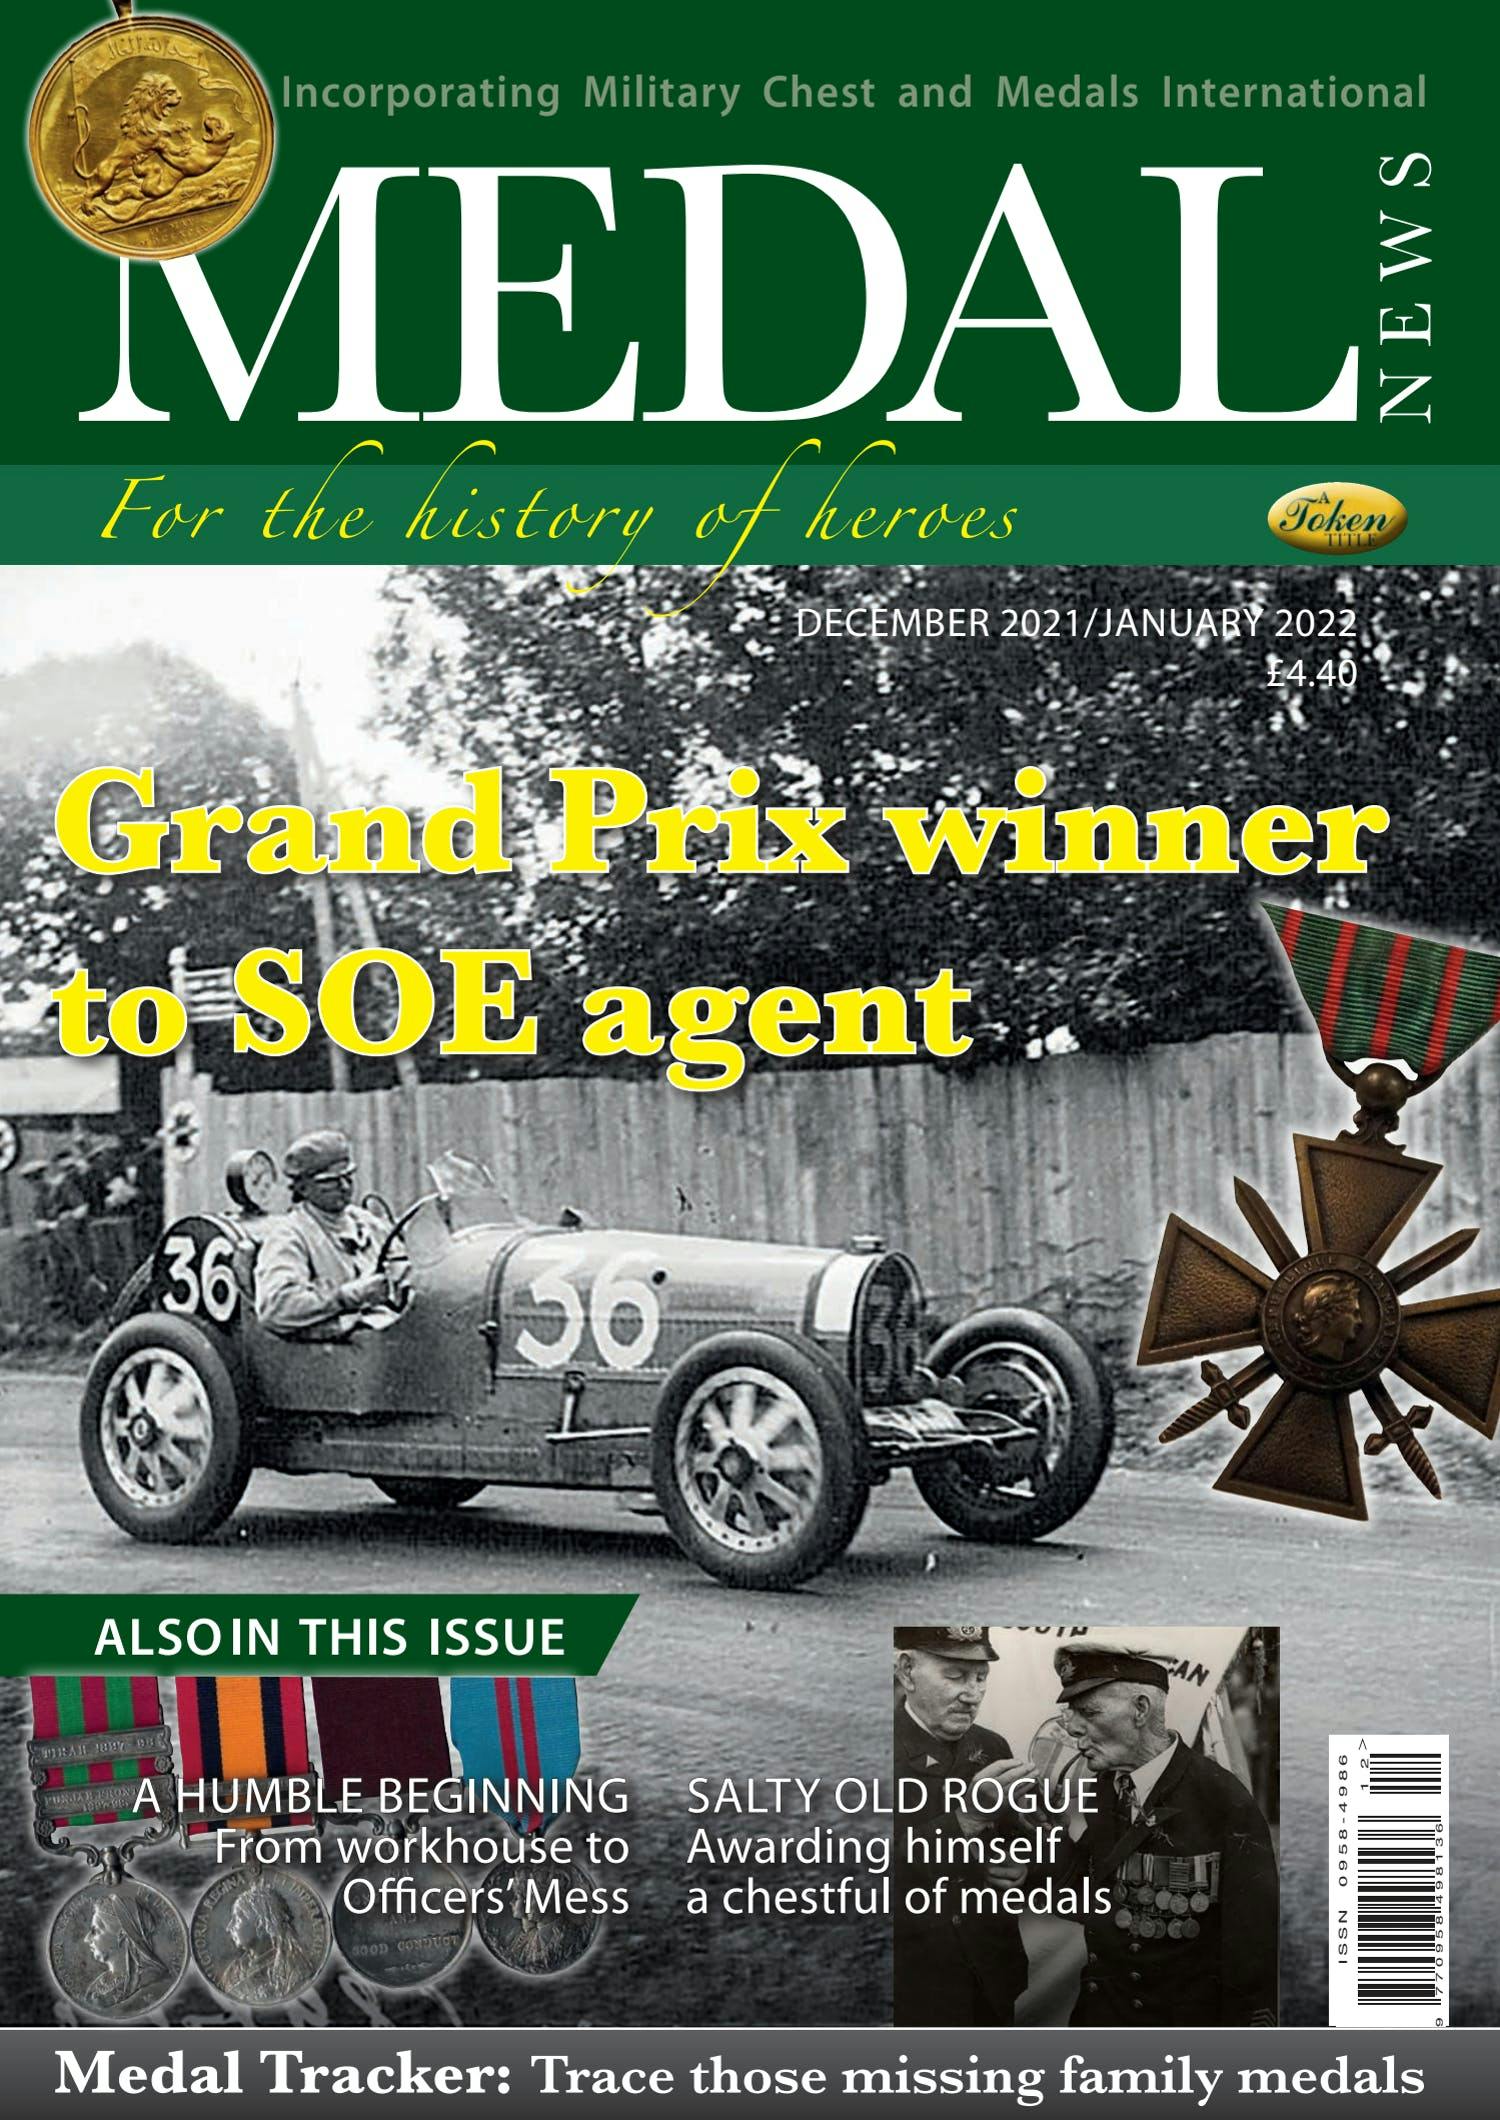 Front cover of 'Grand Prix winner', Medal News January 2022, Volume 60, Number 1 by Token Publishing